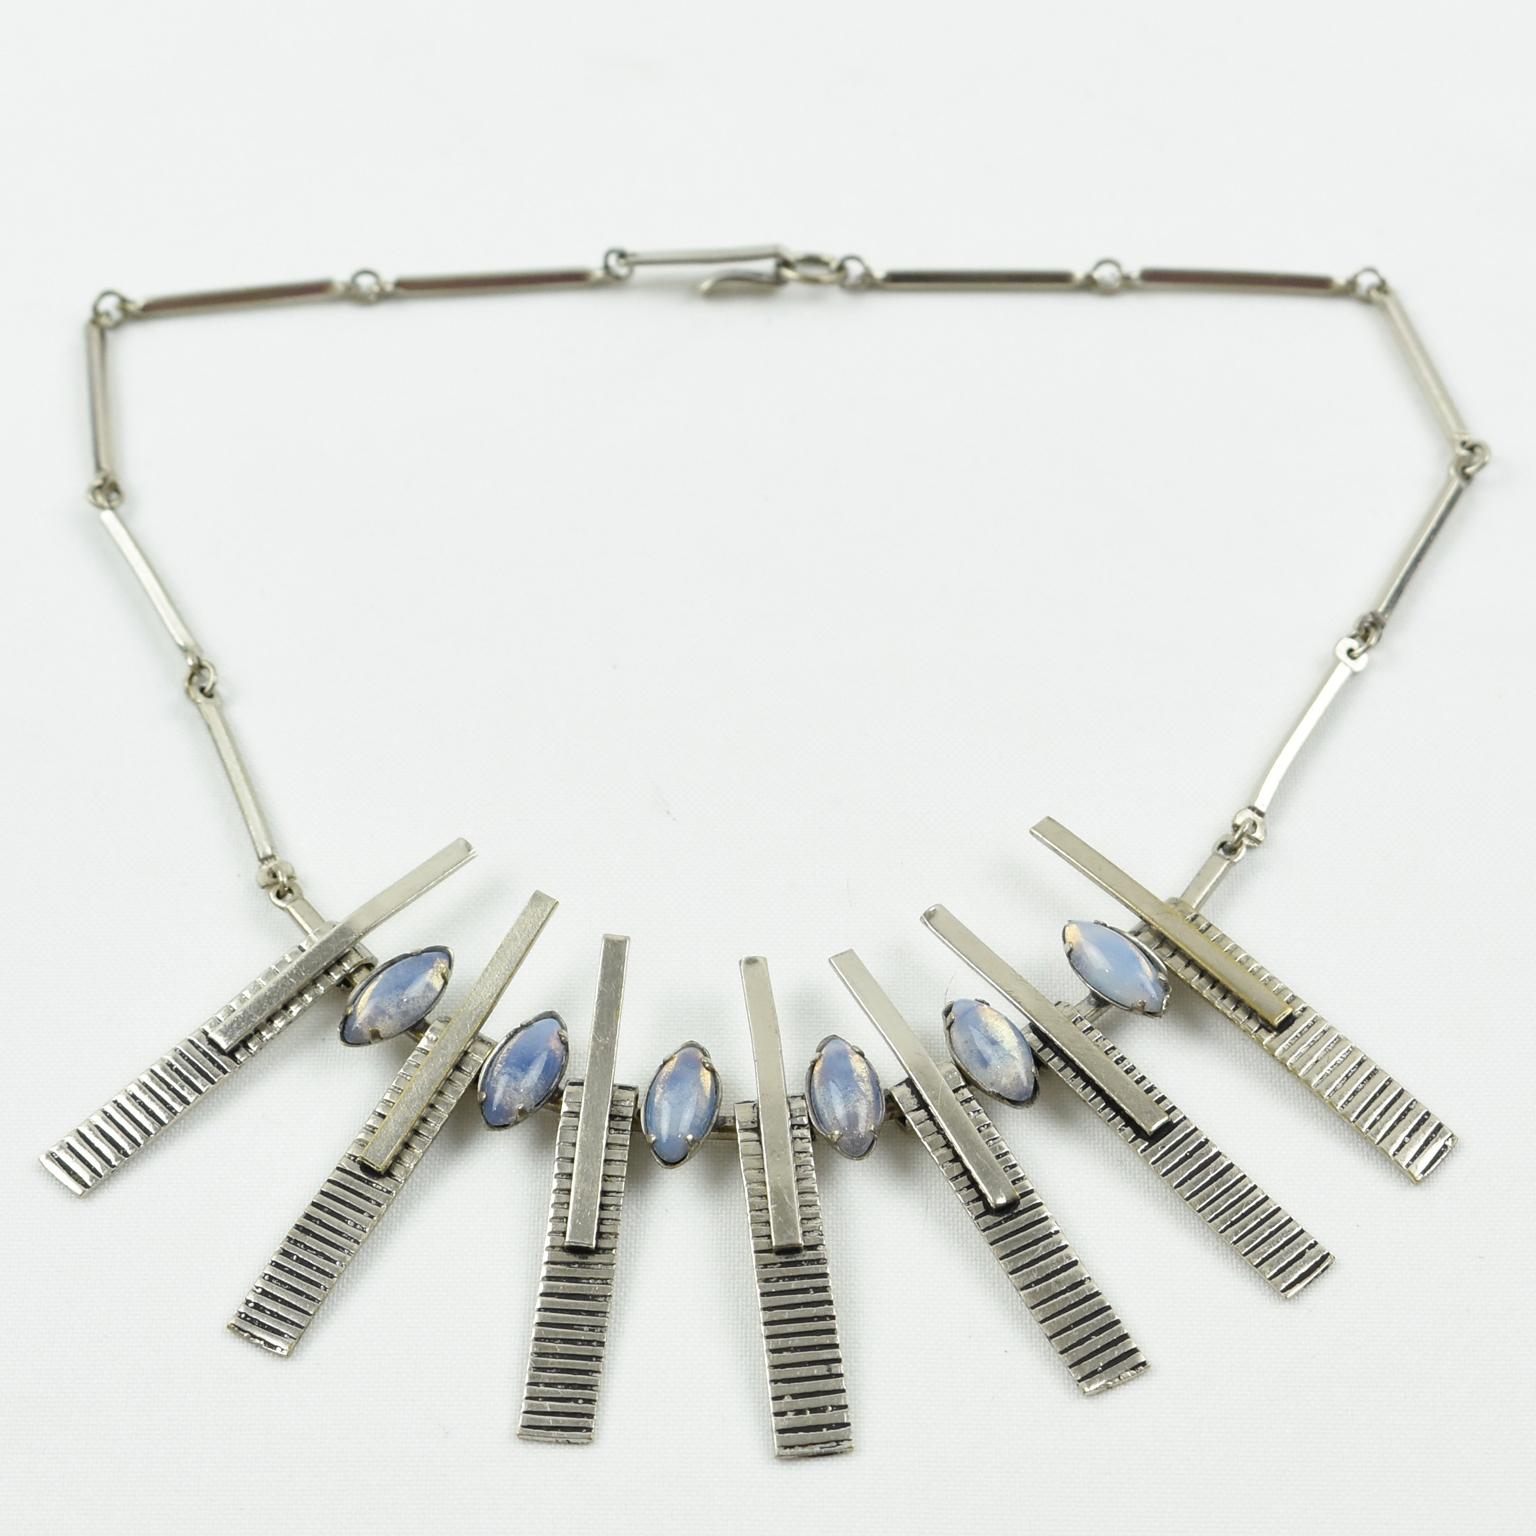 Modernist Space Age Chrome Choker Necklace with Blue Glass Cabochons For Sale